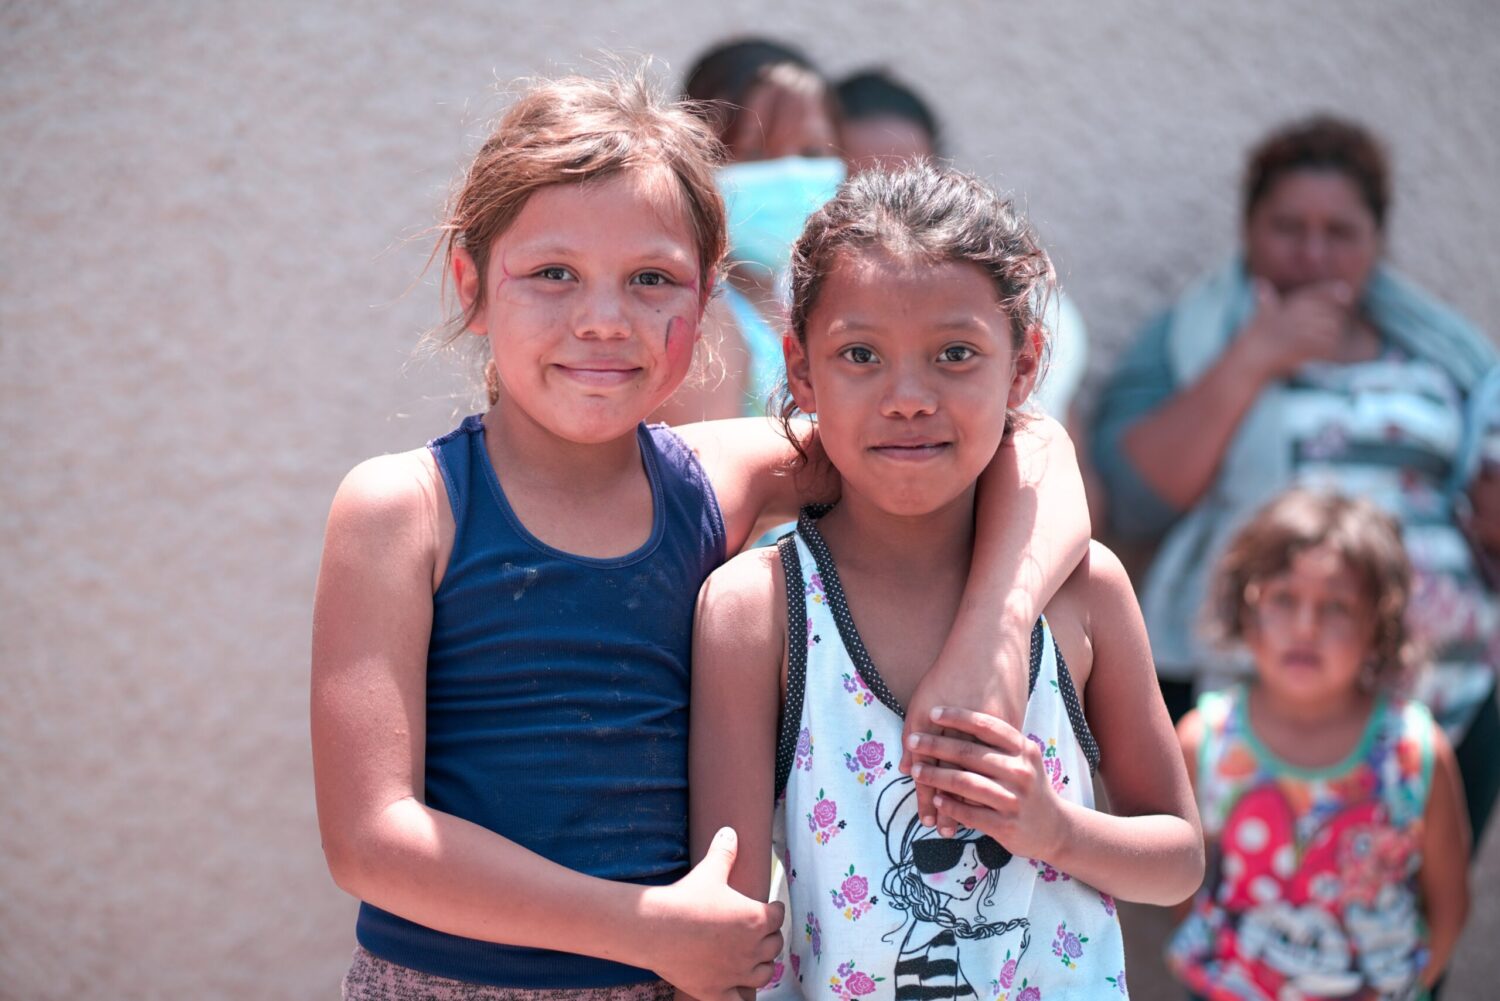 Two young girls who are Mexican migrants on the US border